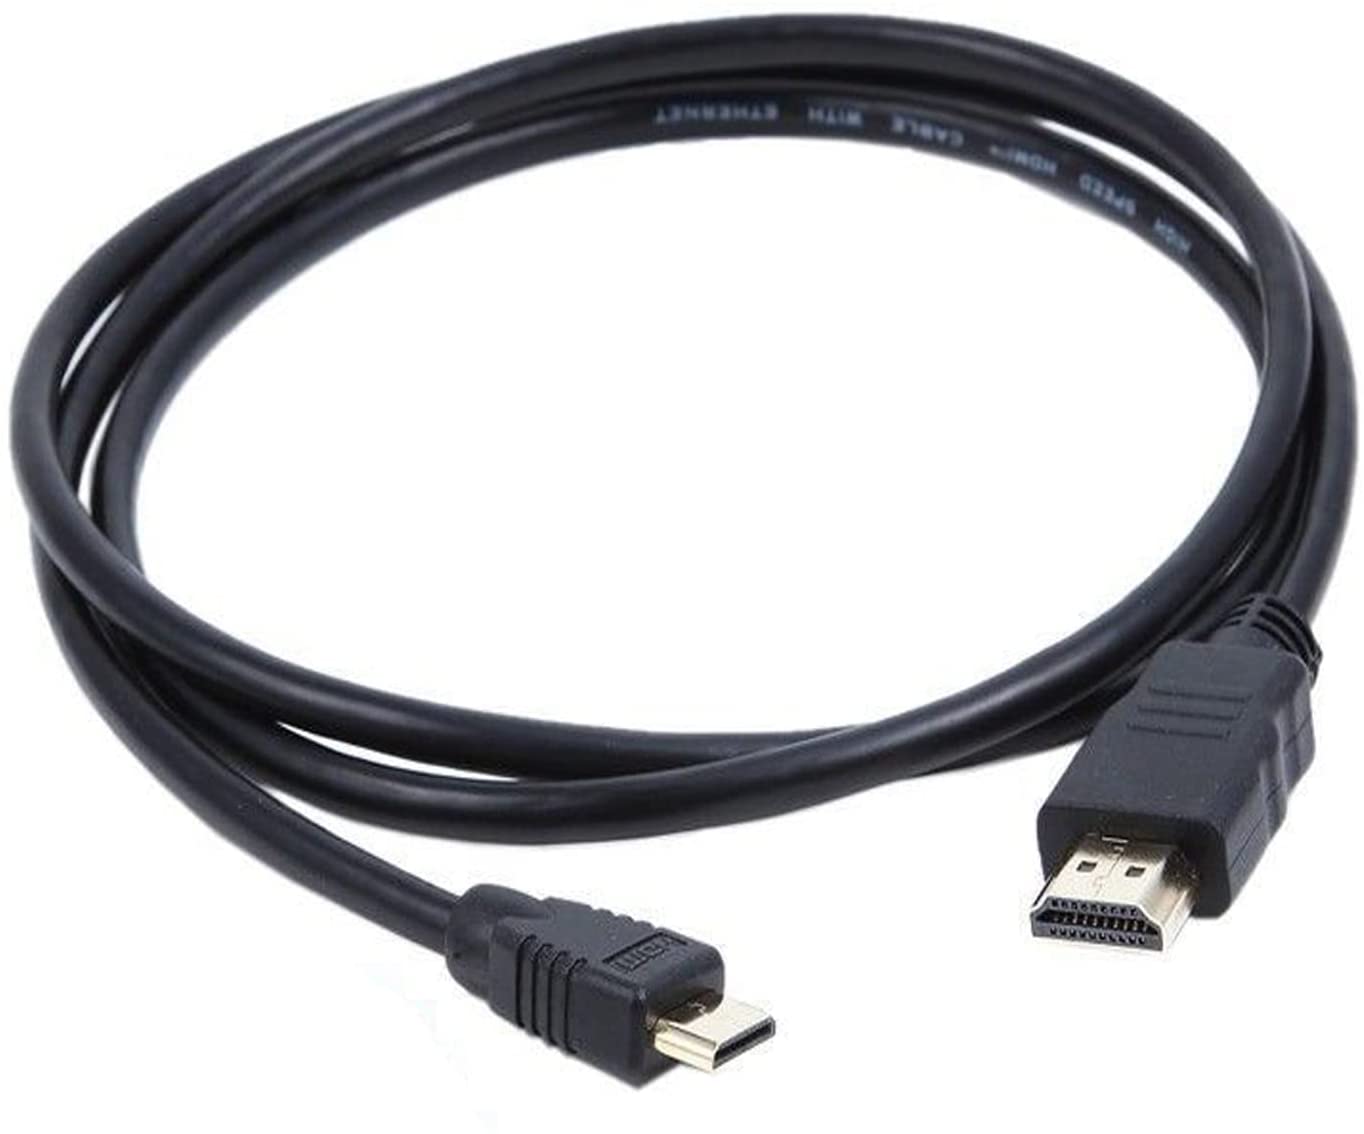 UPBRIGHT HDMI HDTV TV Audio Video AV Cable Cord Lead For TOPI T80 Multi Touch Screen WIFI Android Tablet PC - image 2 of 5